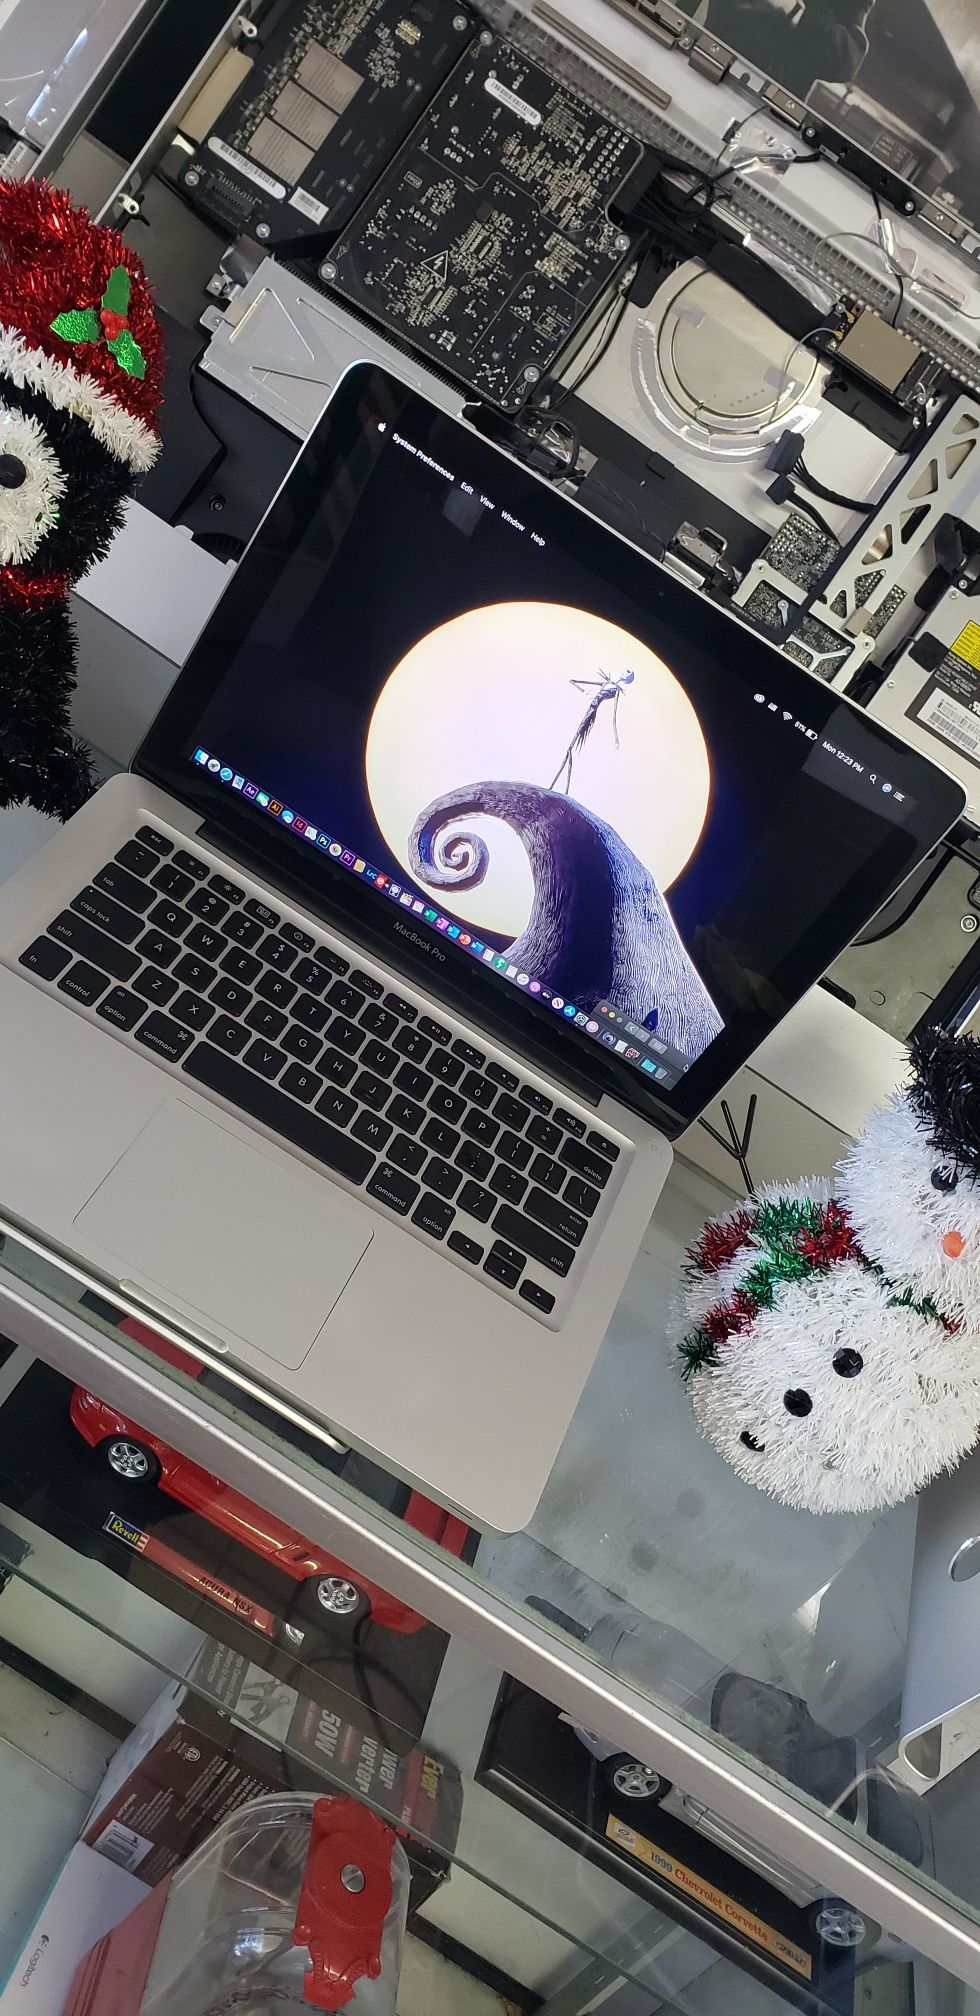 🎅🎁 APPLE MACBOOK PRO LAPTOP 💻 SSD FULLY LOADED WITH SOFTWARE GREAT FOR 🎁 WORK AND SCHOOL GIFT 🎁